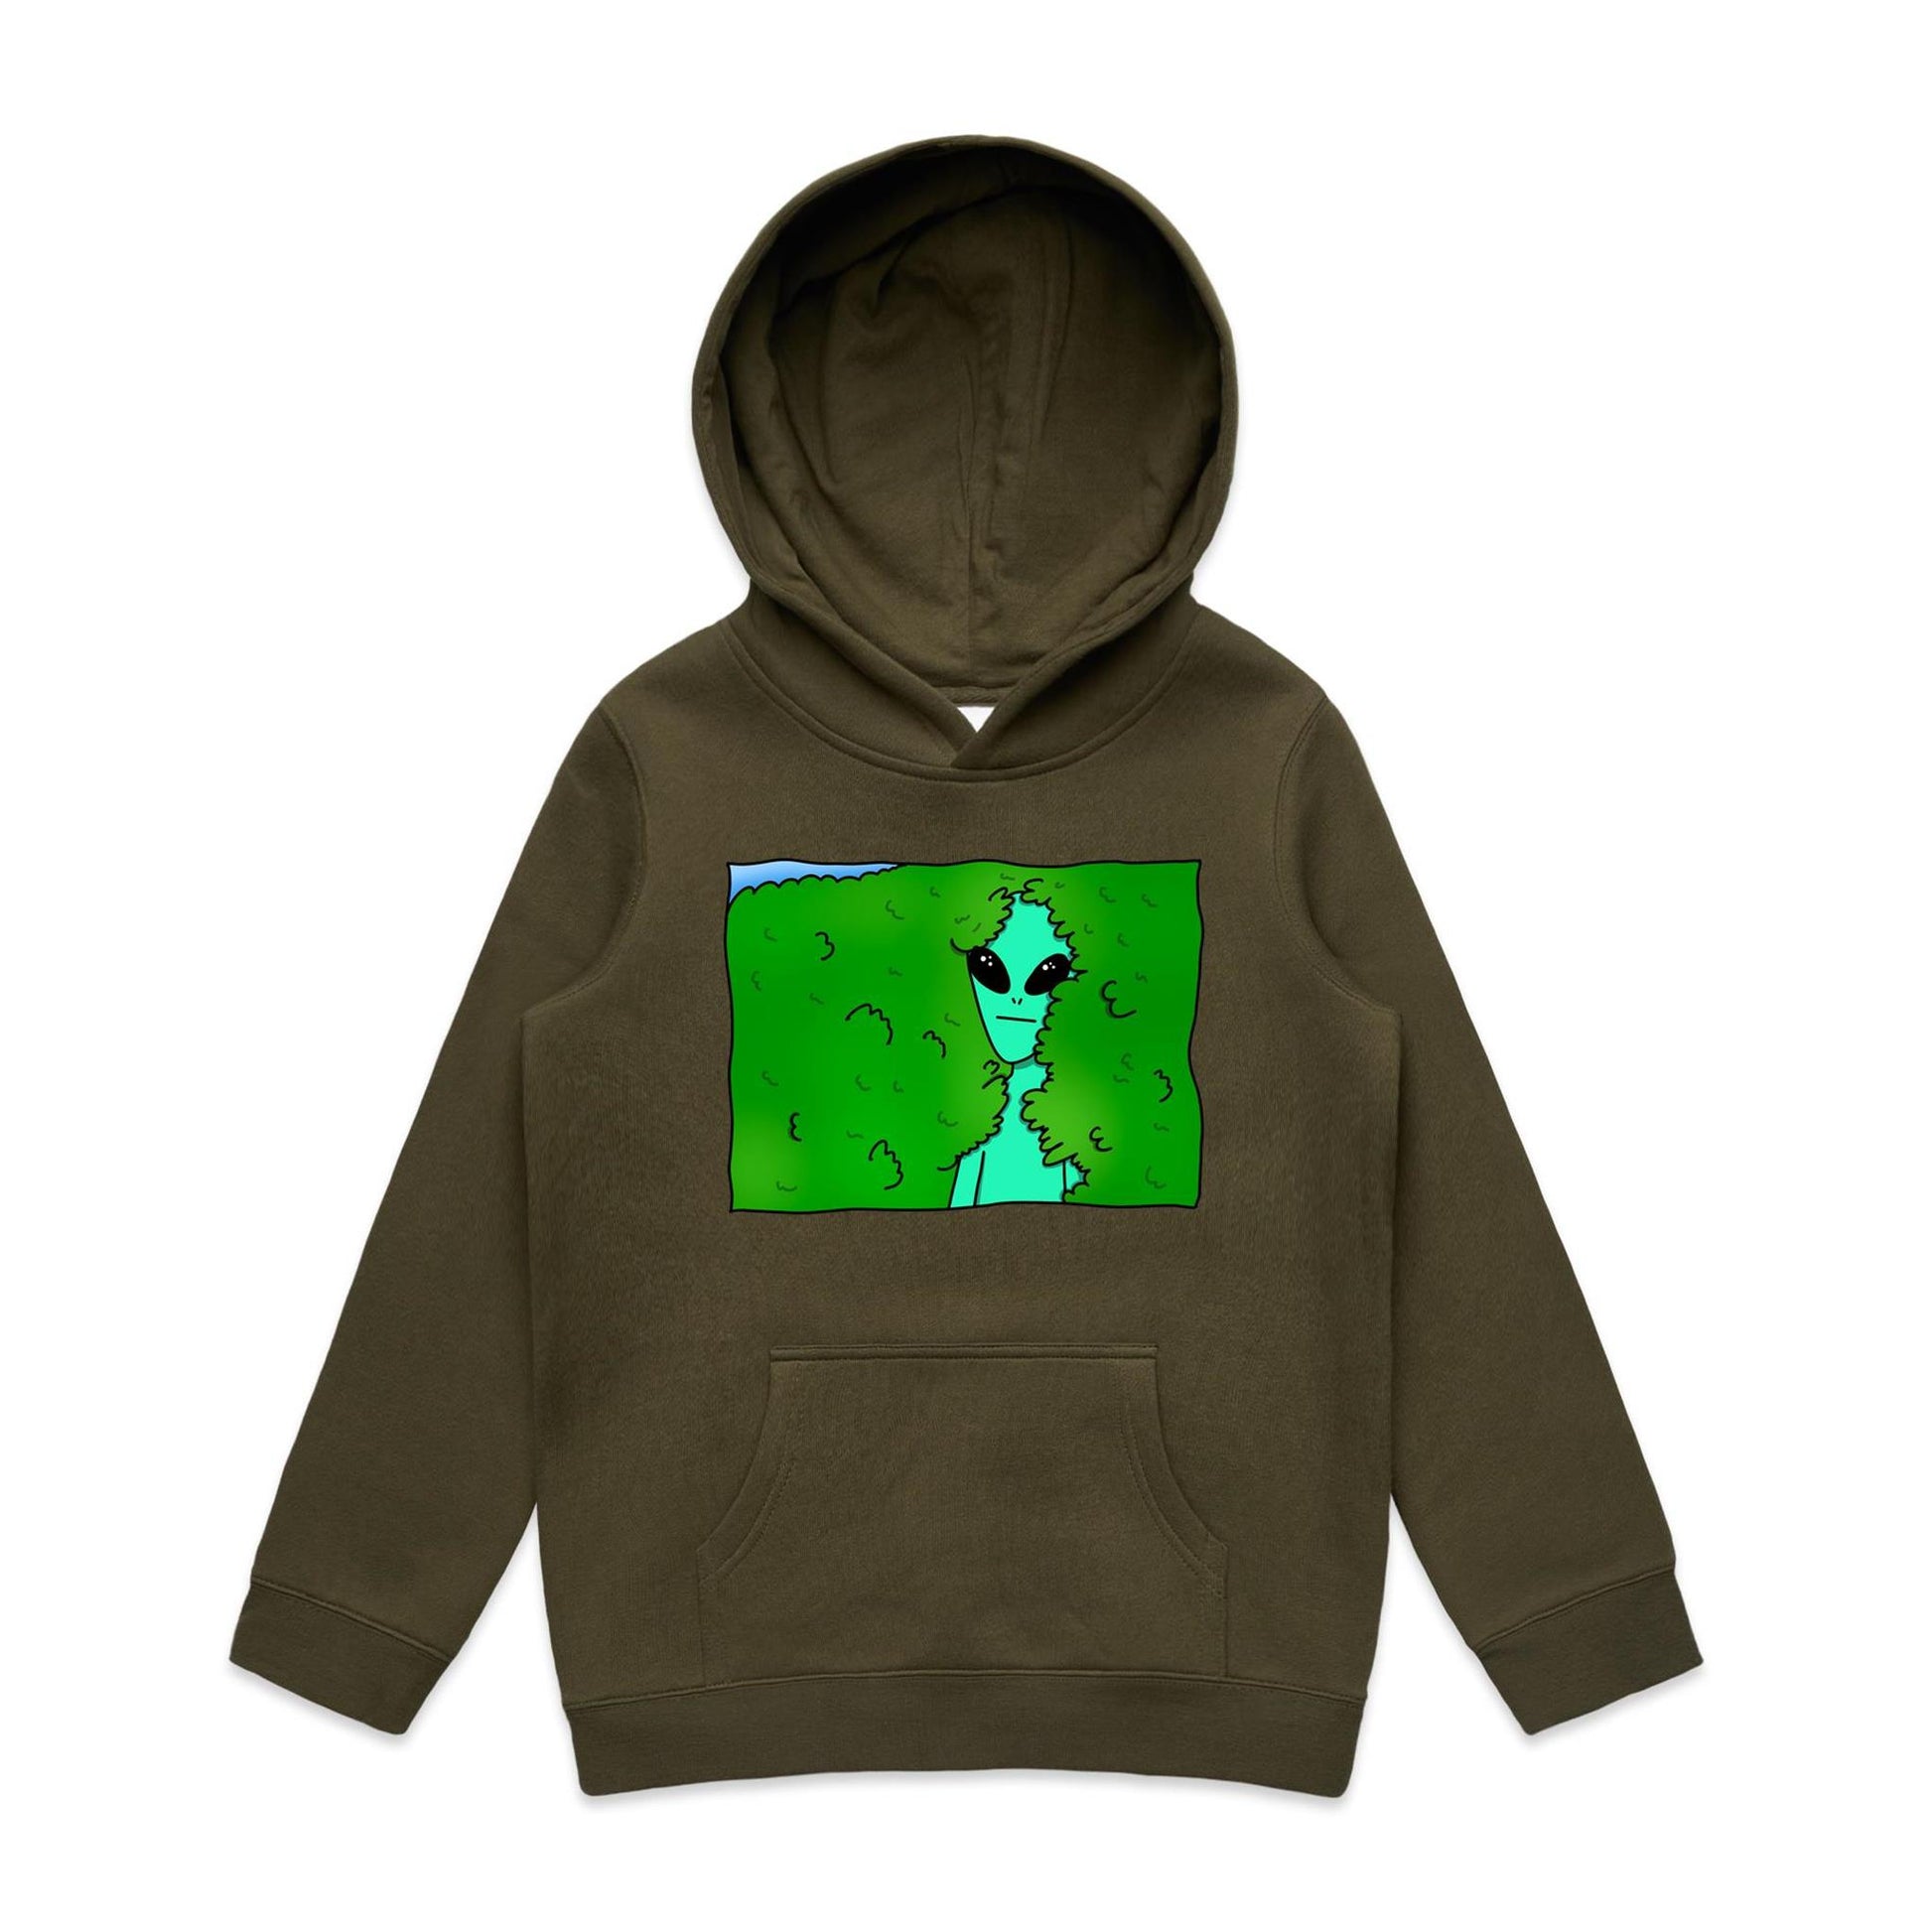 Alien Backing Into Hedge Meme - Youth Supply Hood Army Kids Hoodie Funny Sci Fi